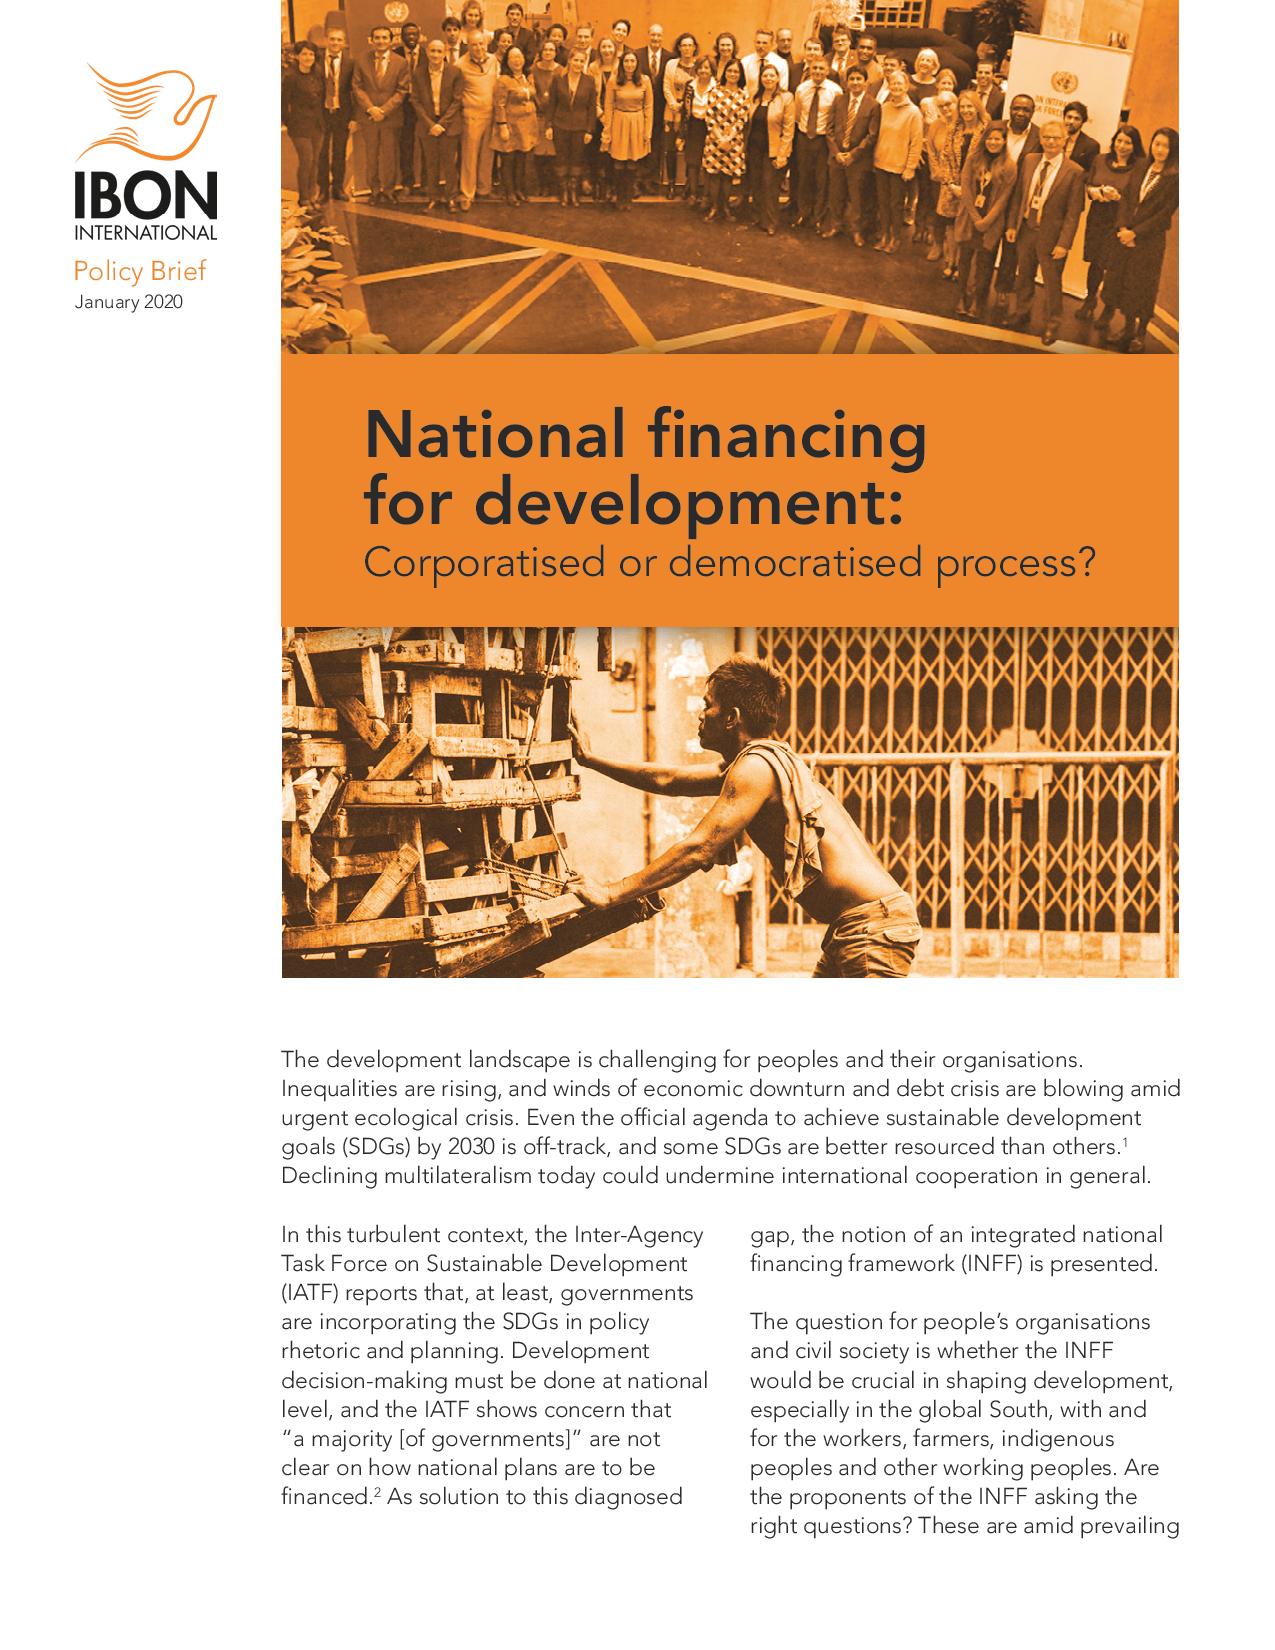 National financing for development: Corporatised or democratised process?